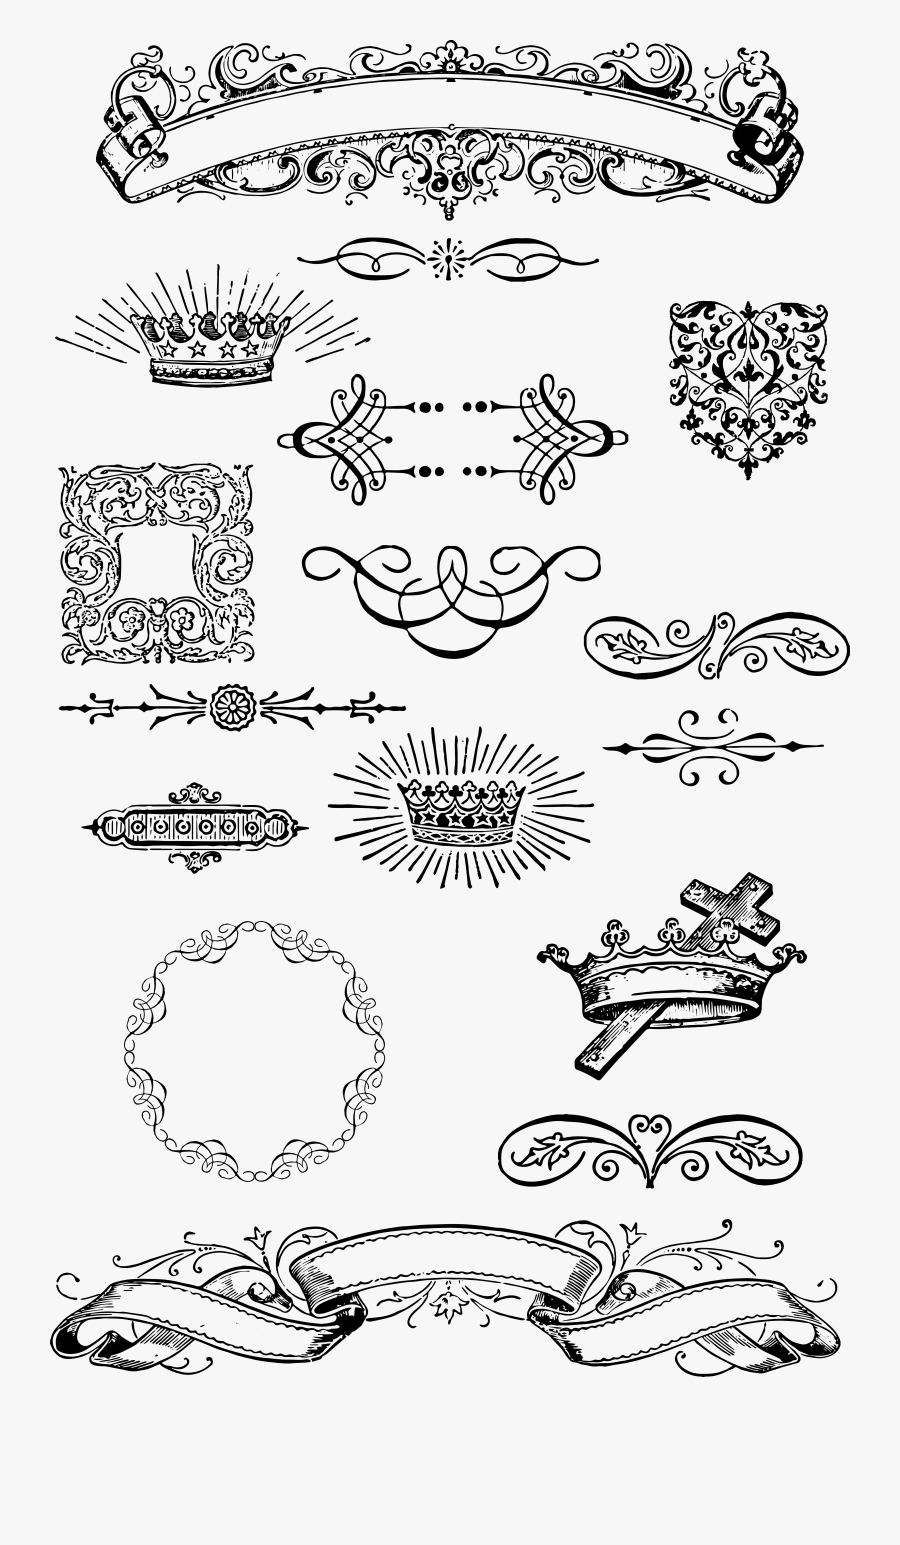 Free Vintage Grunge Vector And Clip Art Ornaments For - Free Vintage Ornament Png, Transparent Clipart